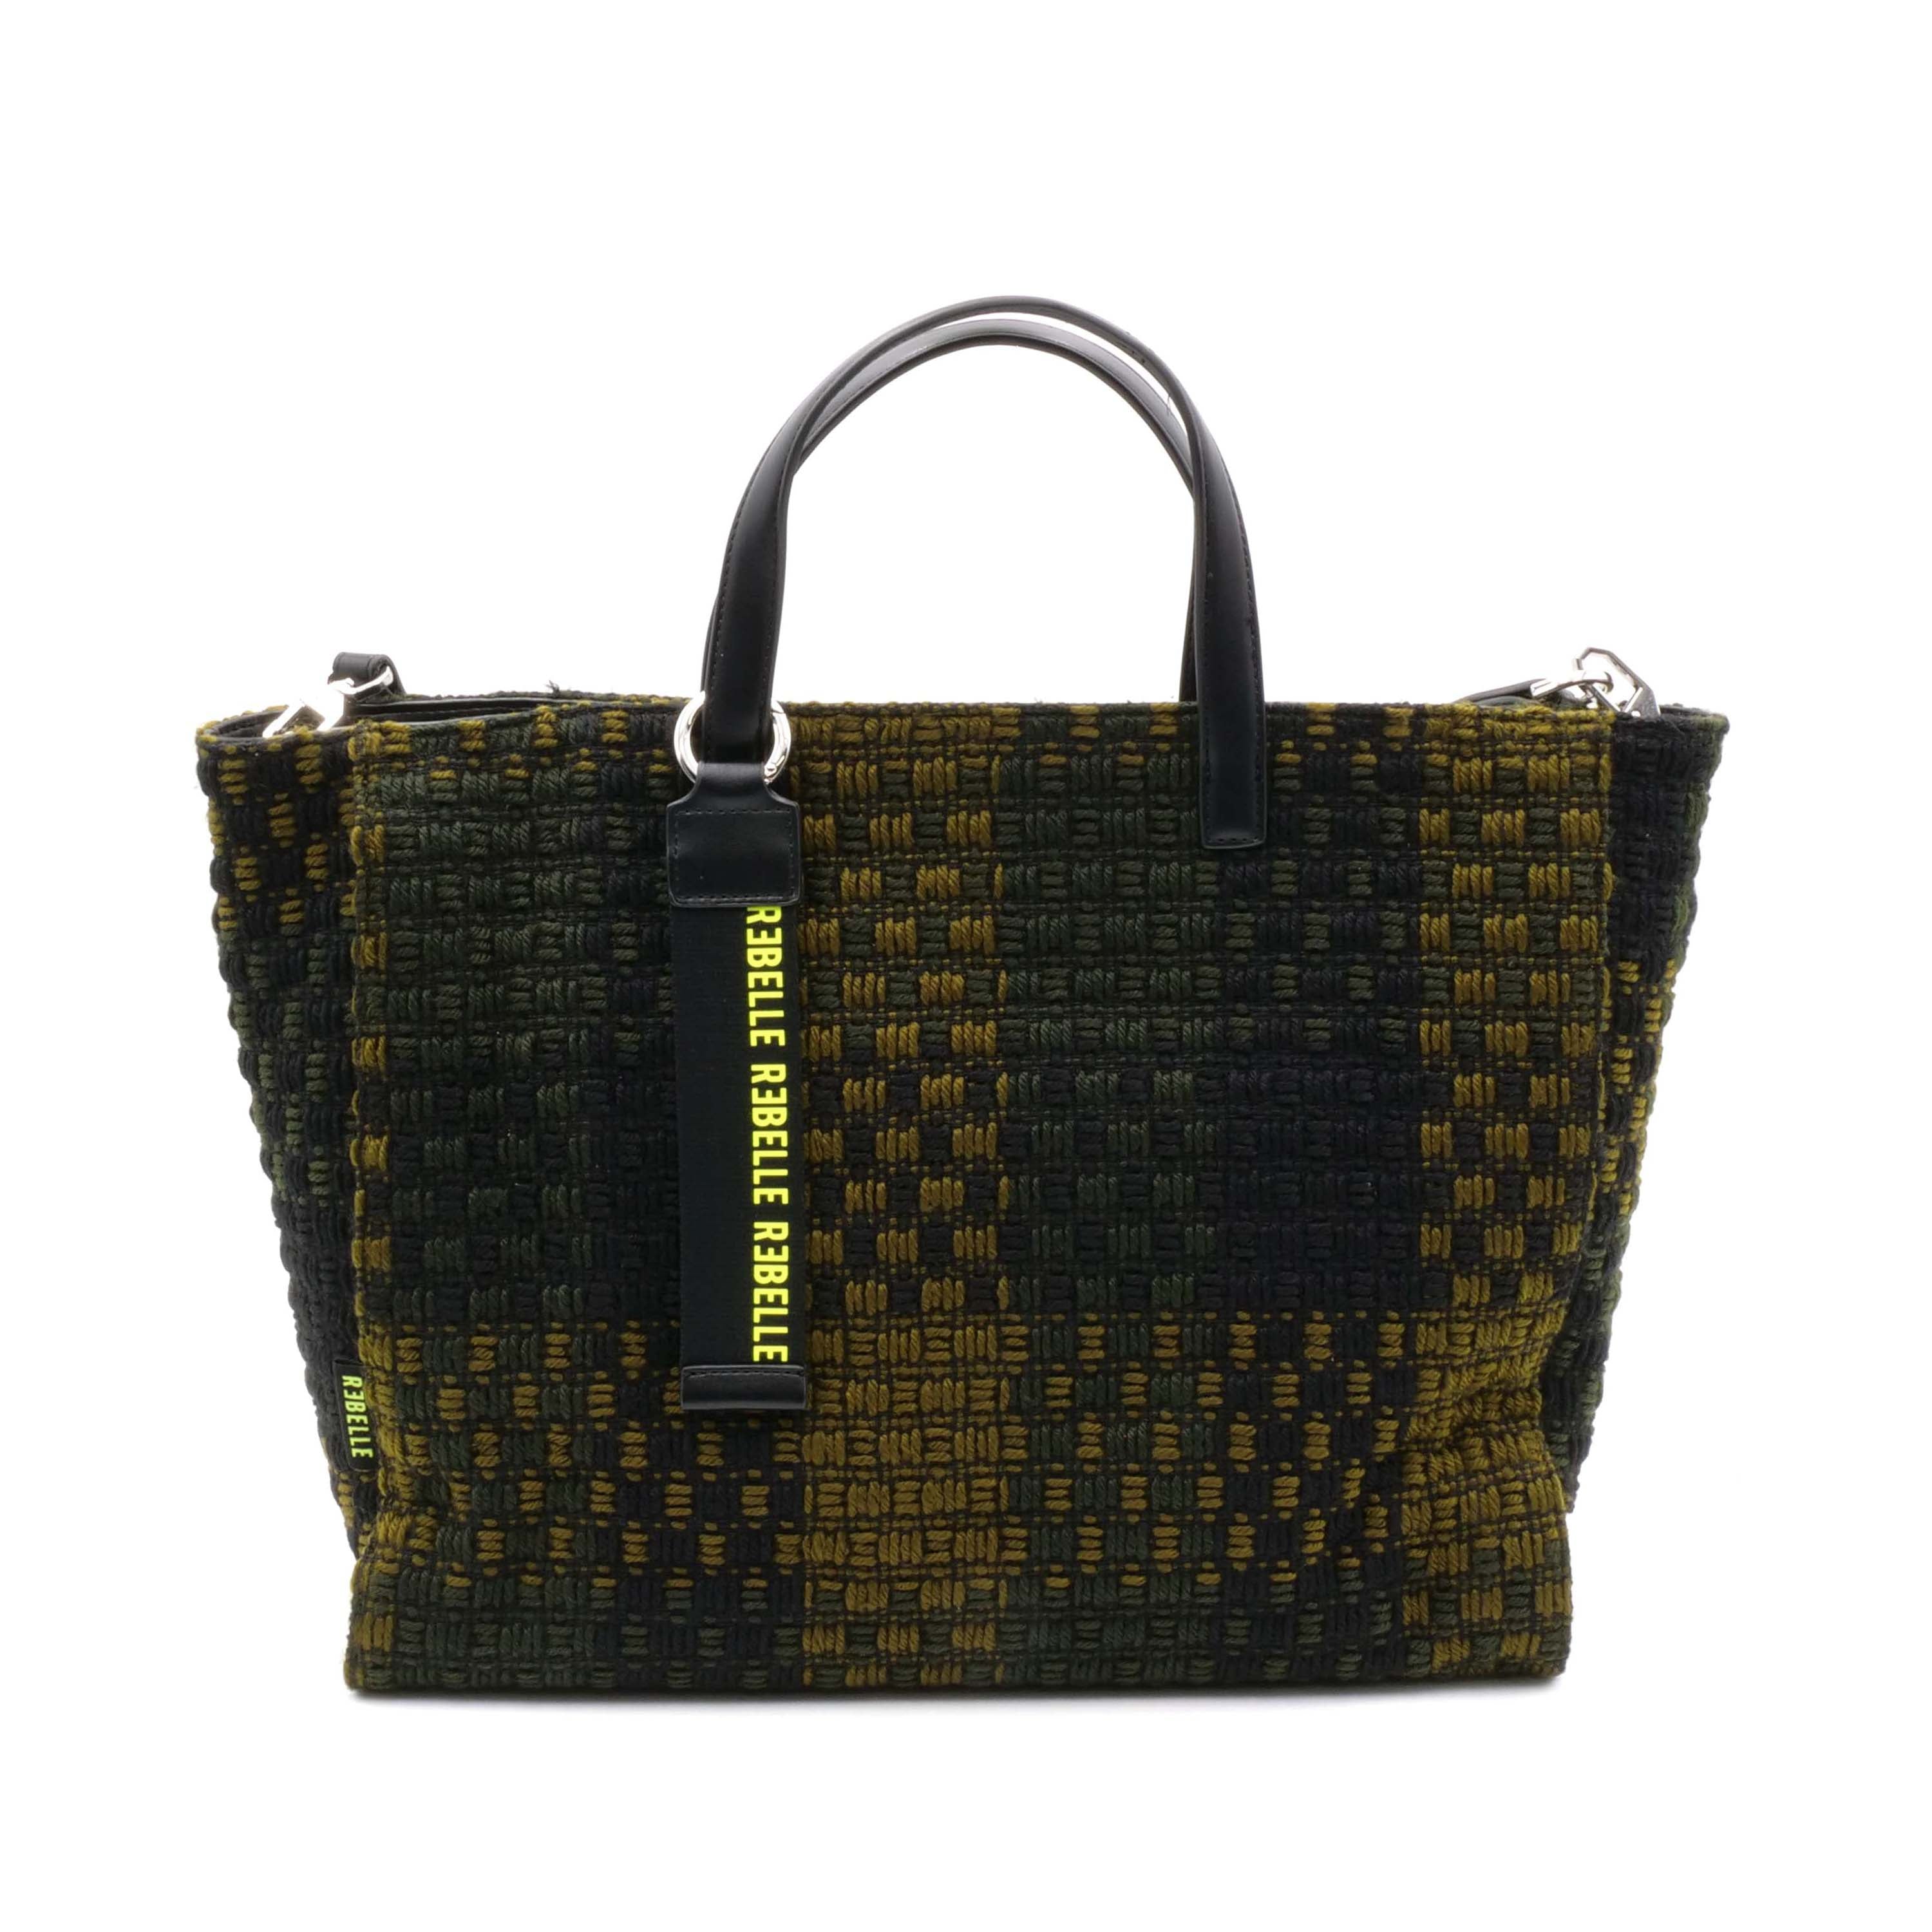 ASHANTI REBELLE CHECKED WIRE bag - OLIVE